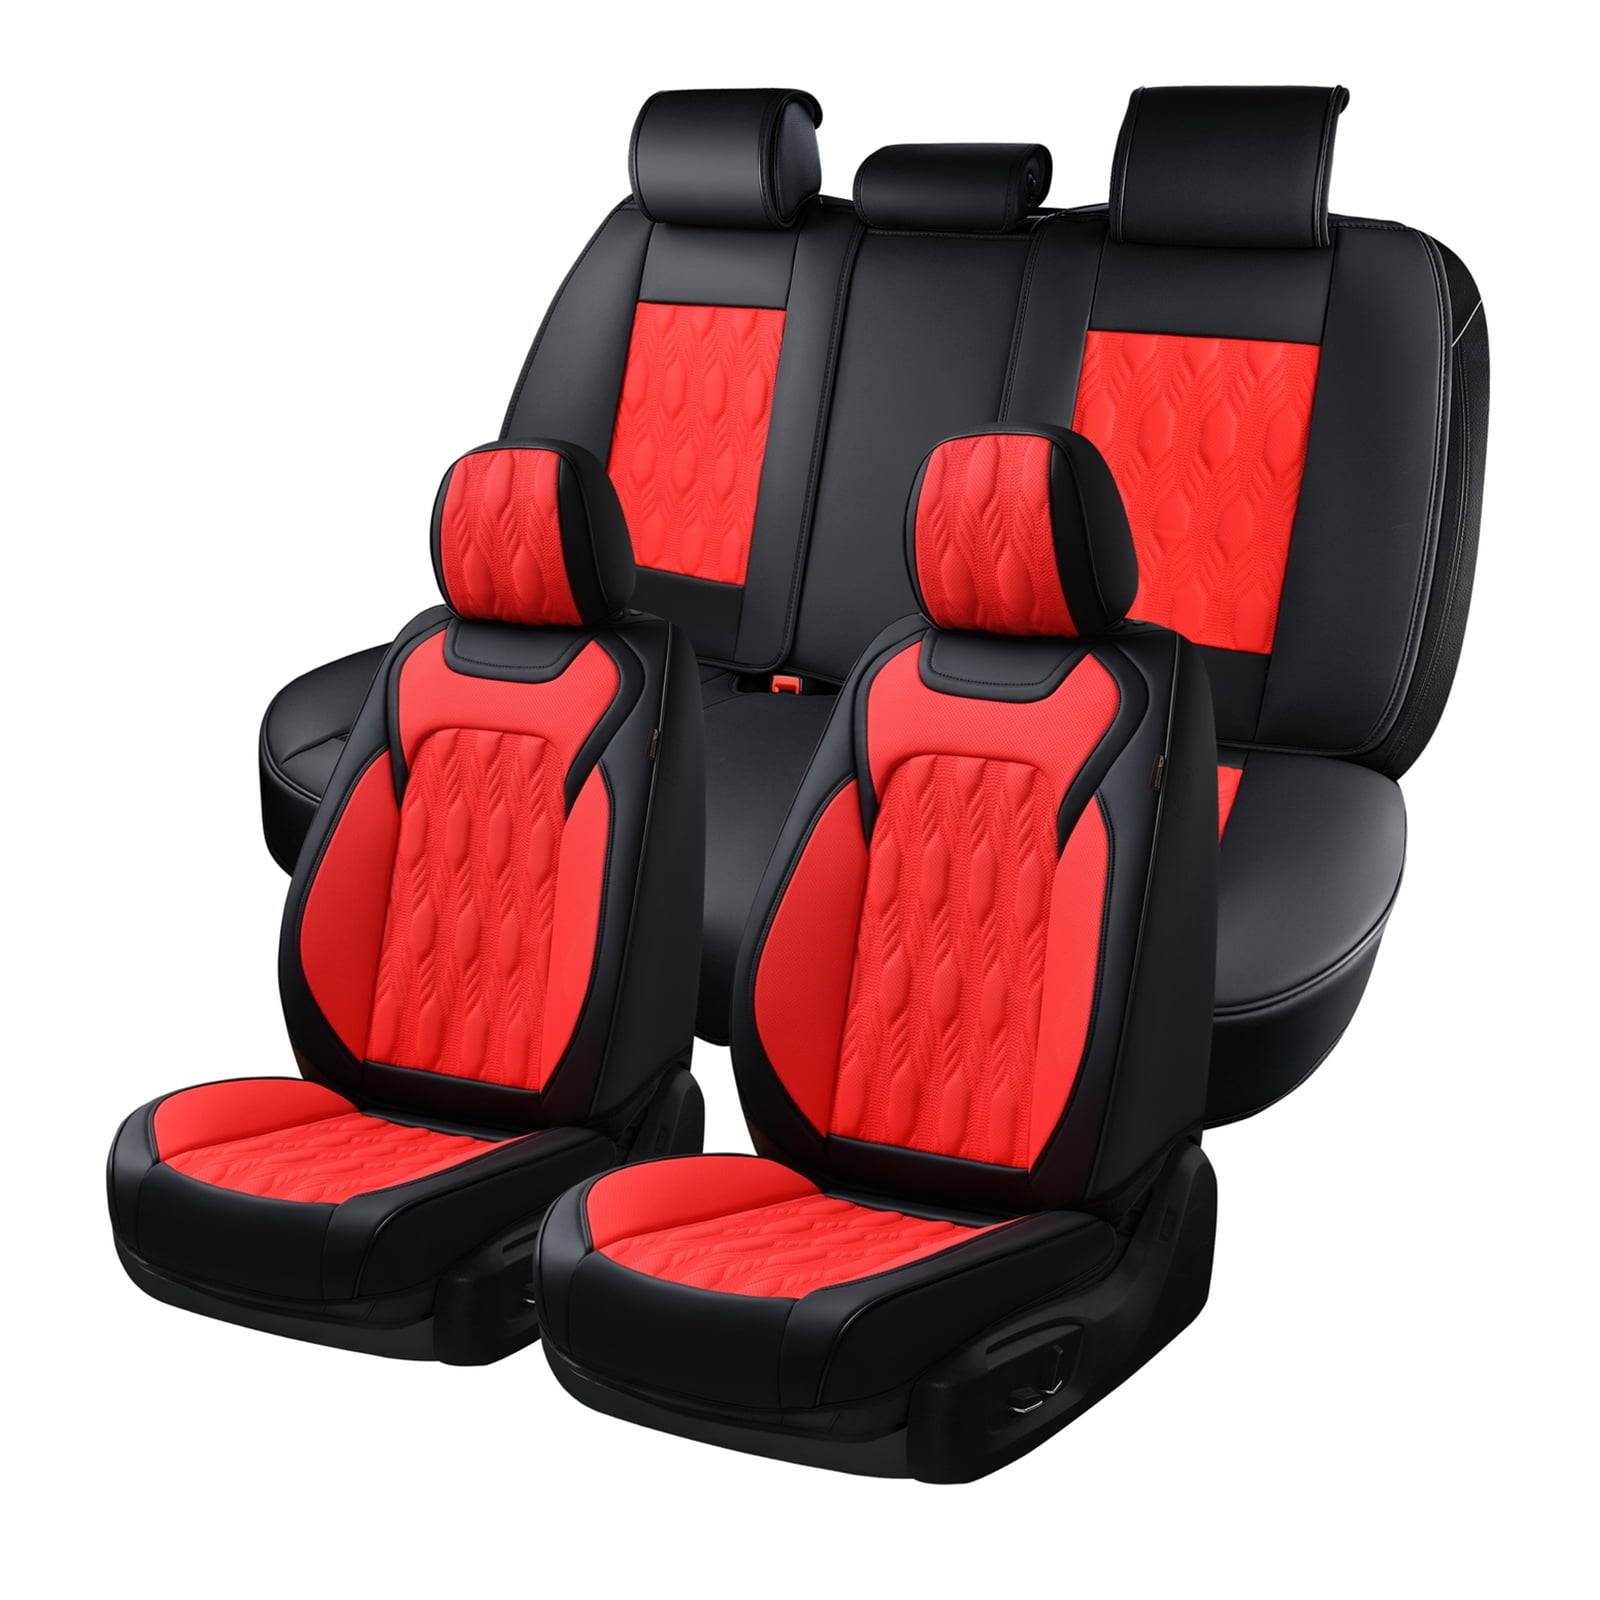 10 Best Car Seat Cushions and Covers